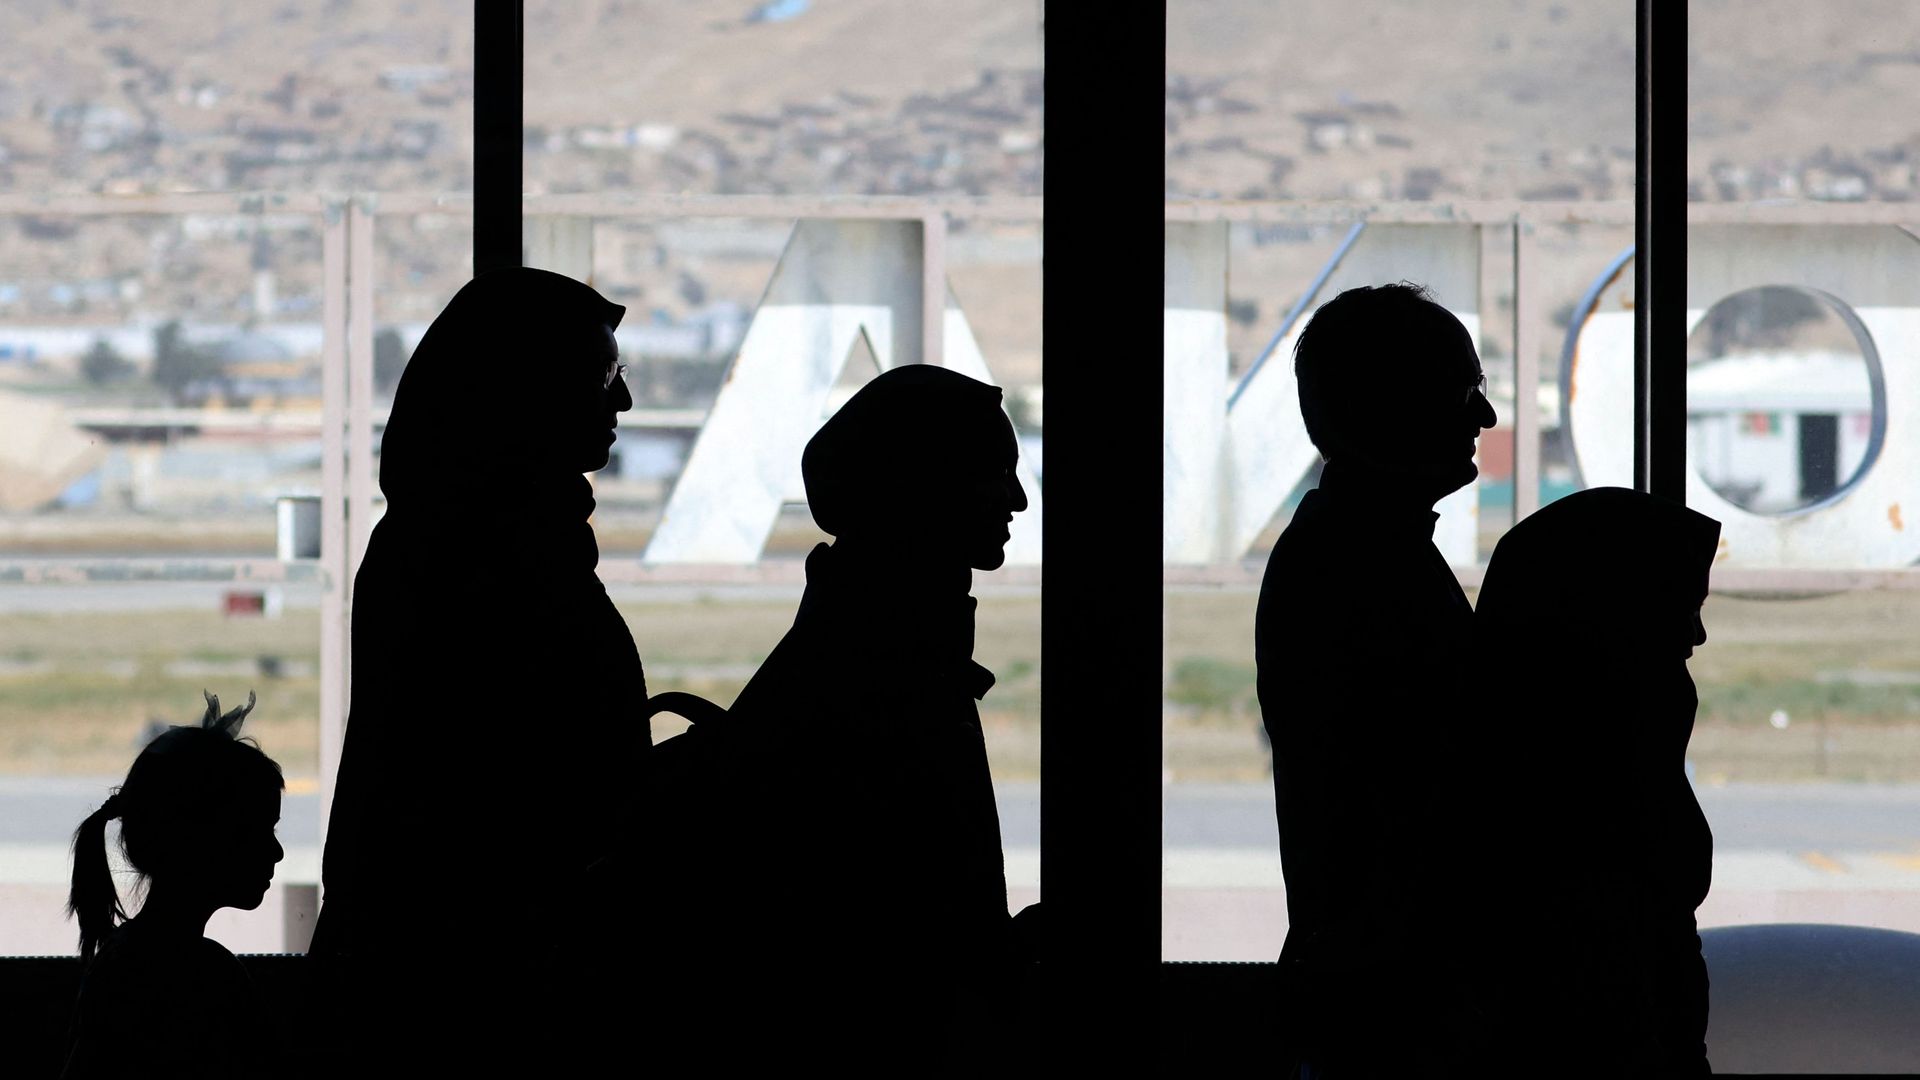 Photo of silhouettes of five people waiting in line inside an airport terminal